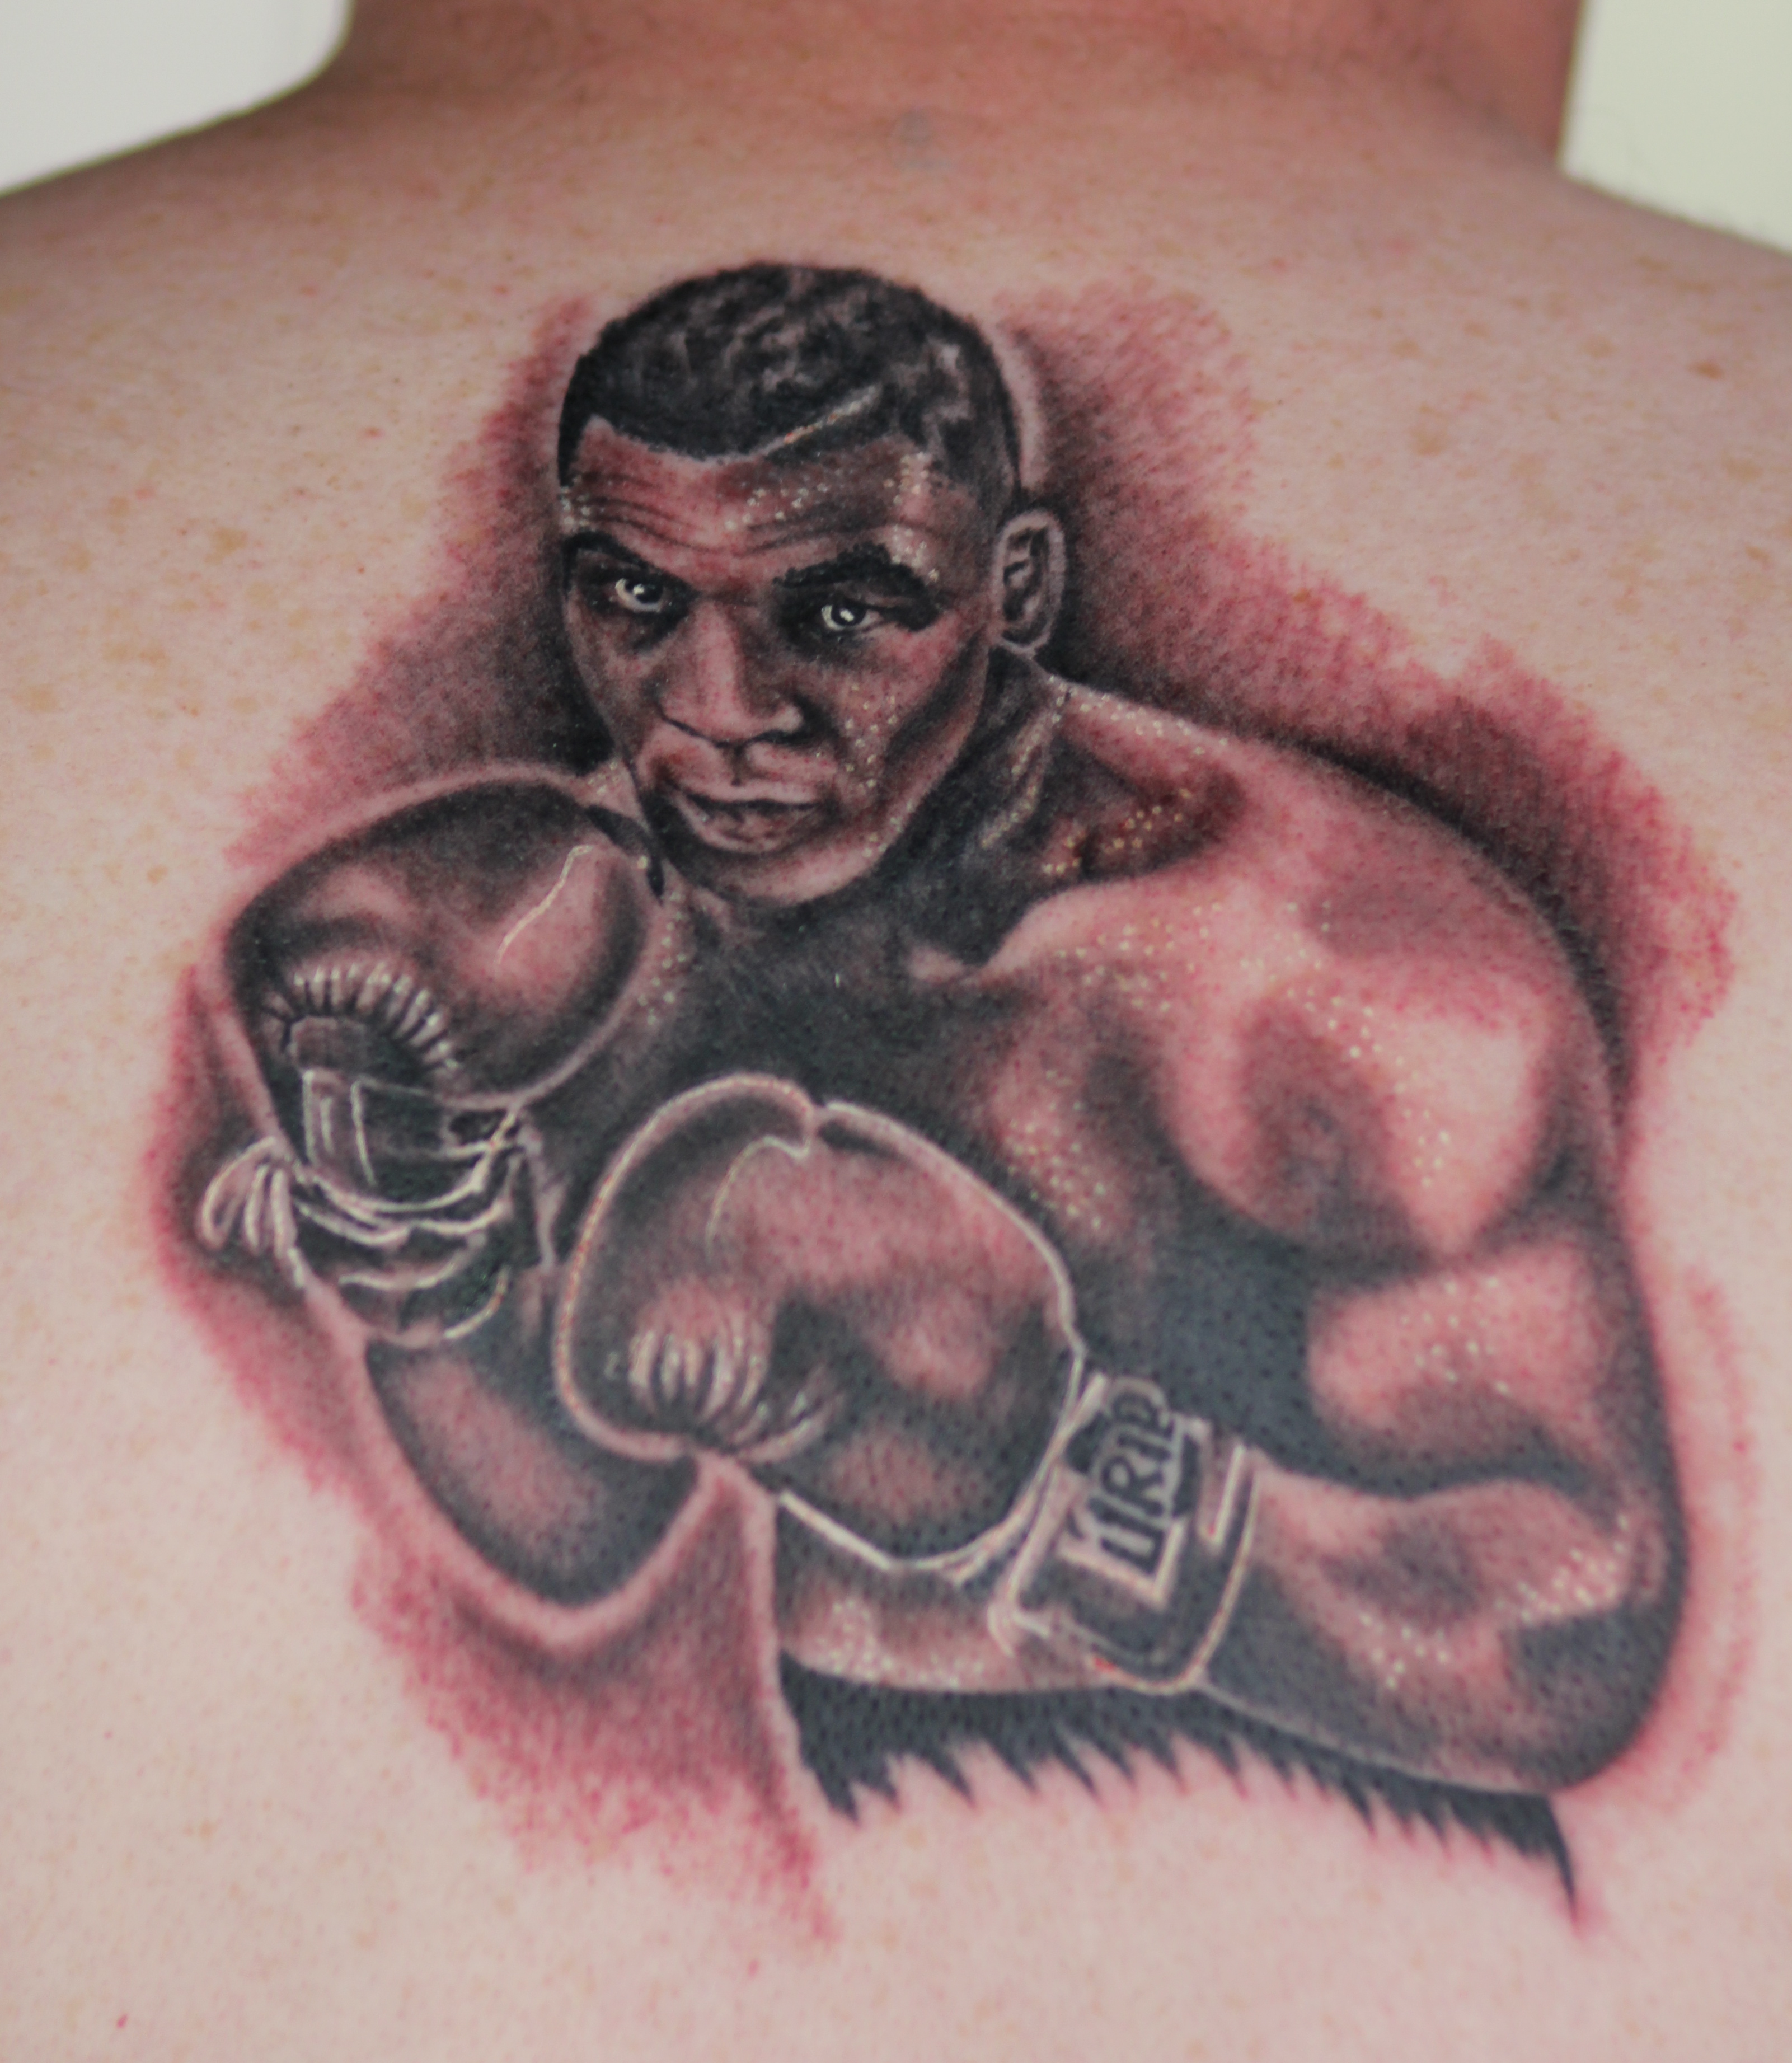 100’s of Mike Tyson Tattoo Design Ideas Picture Gallery.